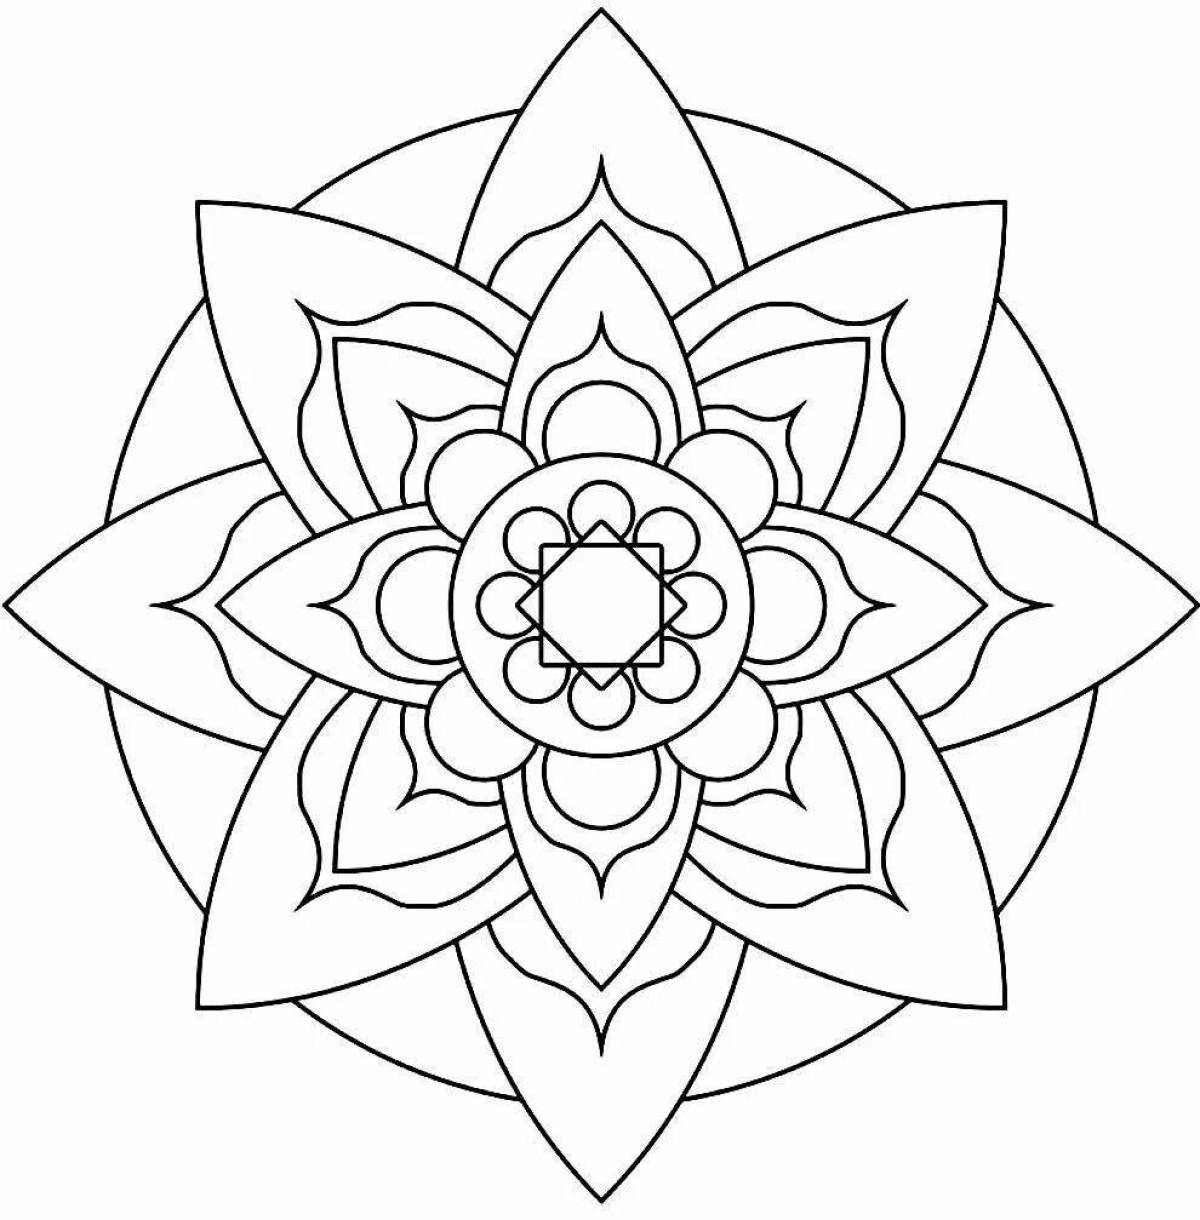 A fascinating light pattern coloring page